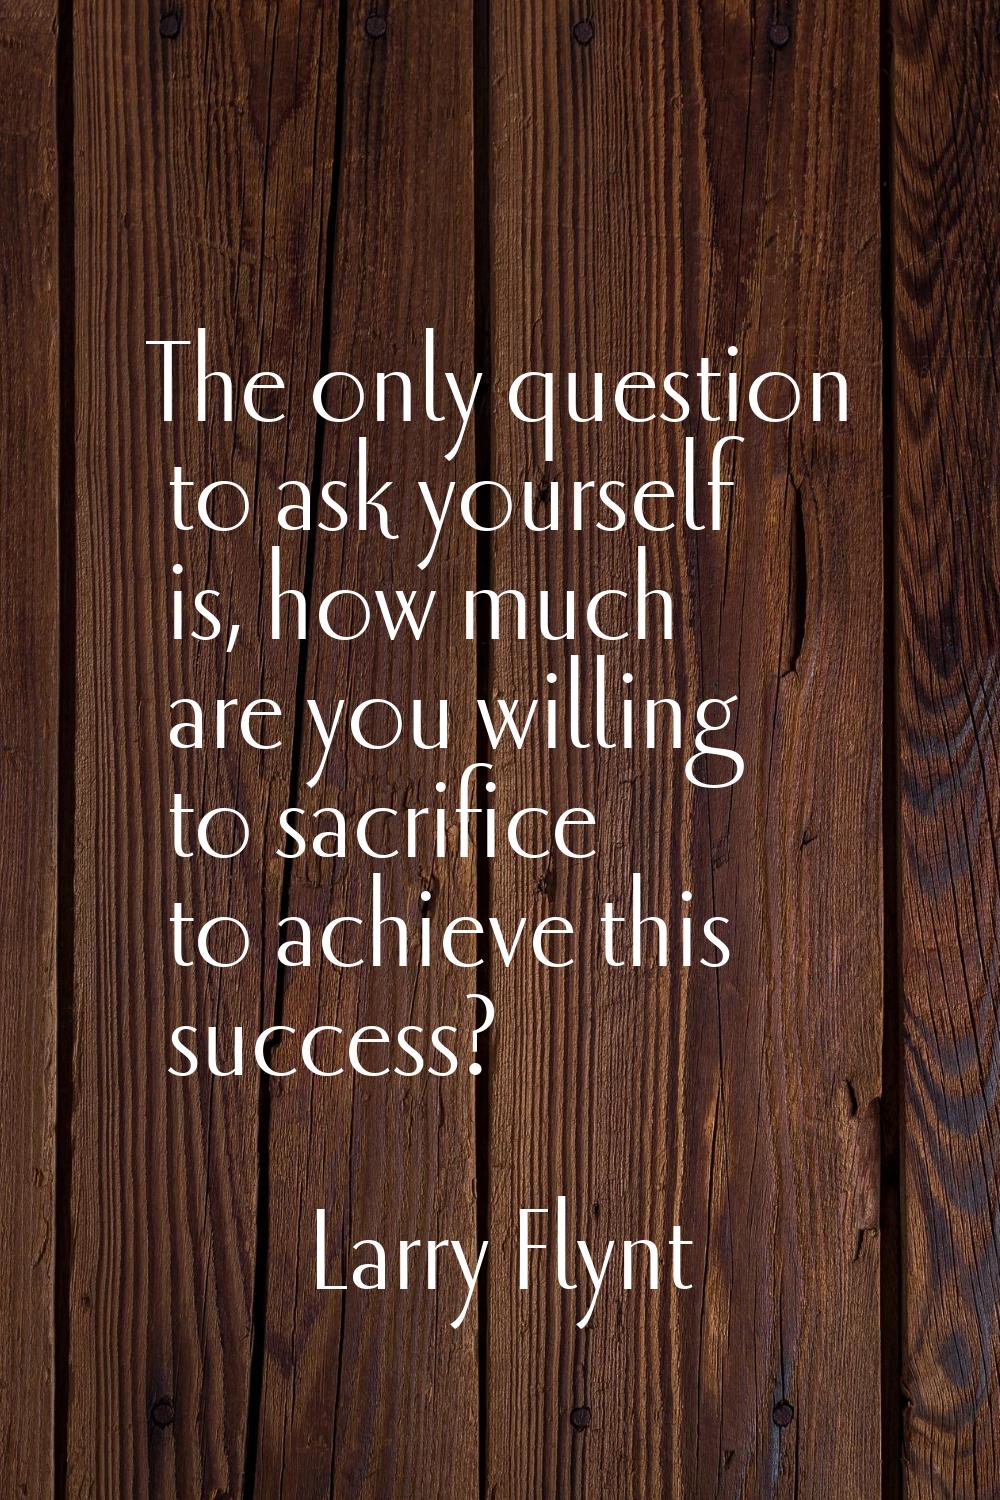 The only question to ask yourself is, how much are you willing to sacrifice to achieve this success